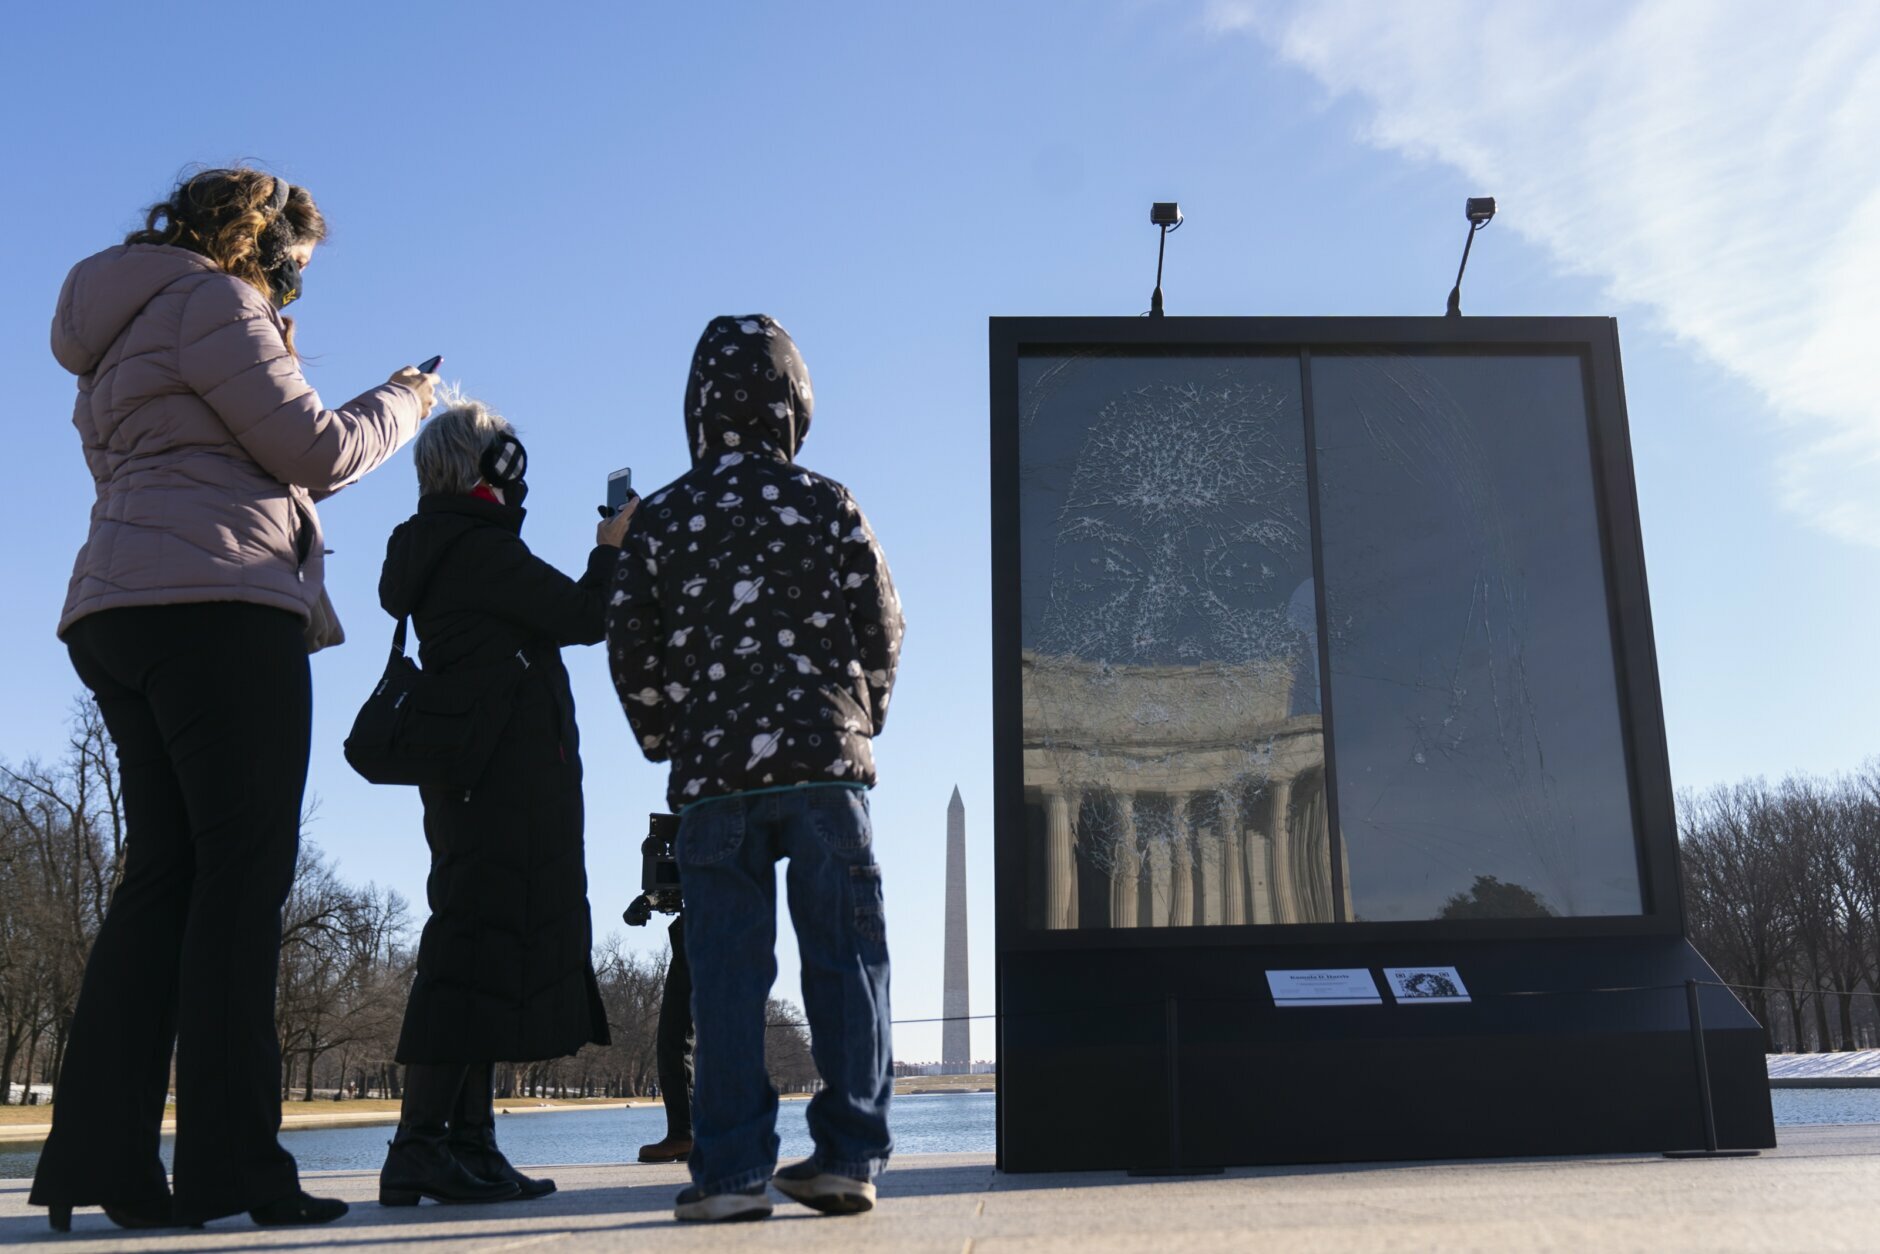 People photograph the installation "Vice President Kamala Harris Glass Ceiling Breaker" at the Lincoln Memorial in Washington, Wednesday, Feb. 4, 2021. Vice President Kamala Harris' barrier-breaking career has been memorialized in a portrait depicting her face emerging from the cracks in a massive sheet of glass. Using a photo of Harris that taken by photographer Celeste Sloman, artist Simon Berger lightly hammered on the slab of laminated glass to create the portrait of Harris. The Washington Monument is seen in the distance and the Lincoln Memorial is reflected. (AP Photo/Carolyn Kaster)